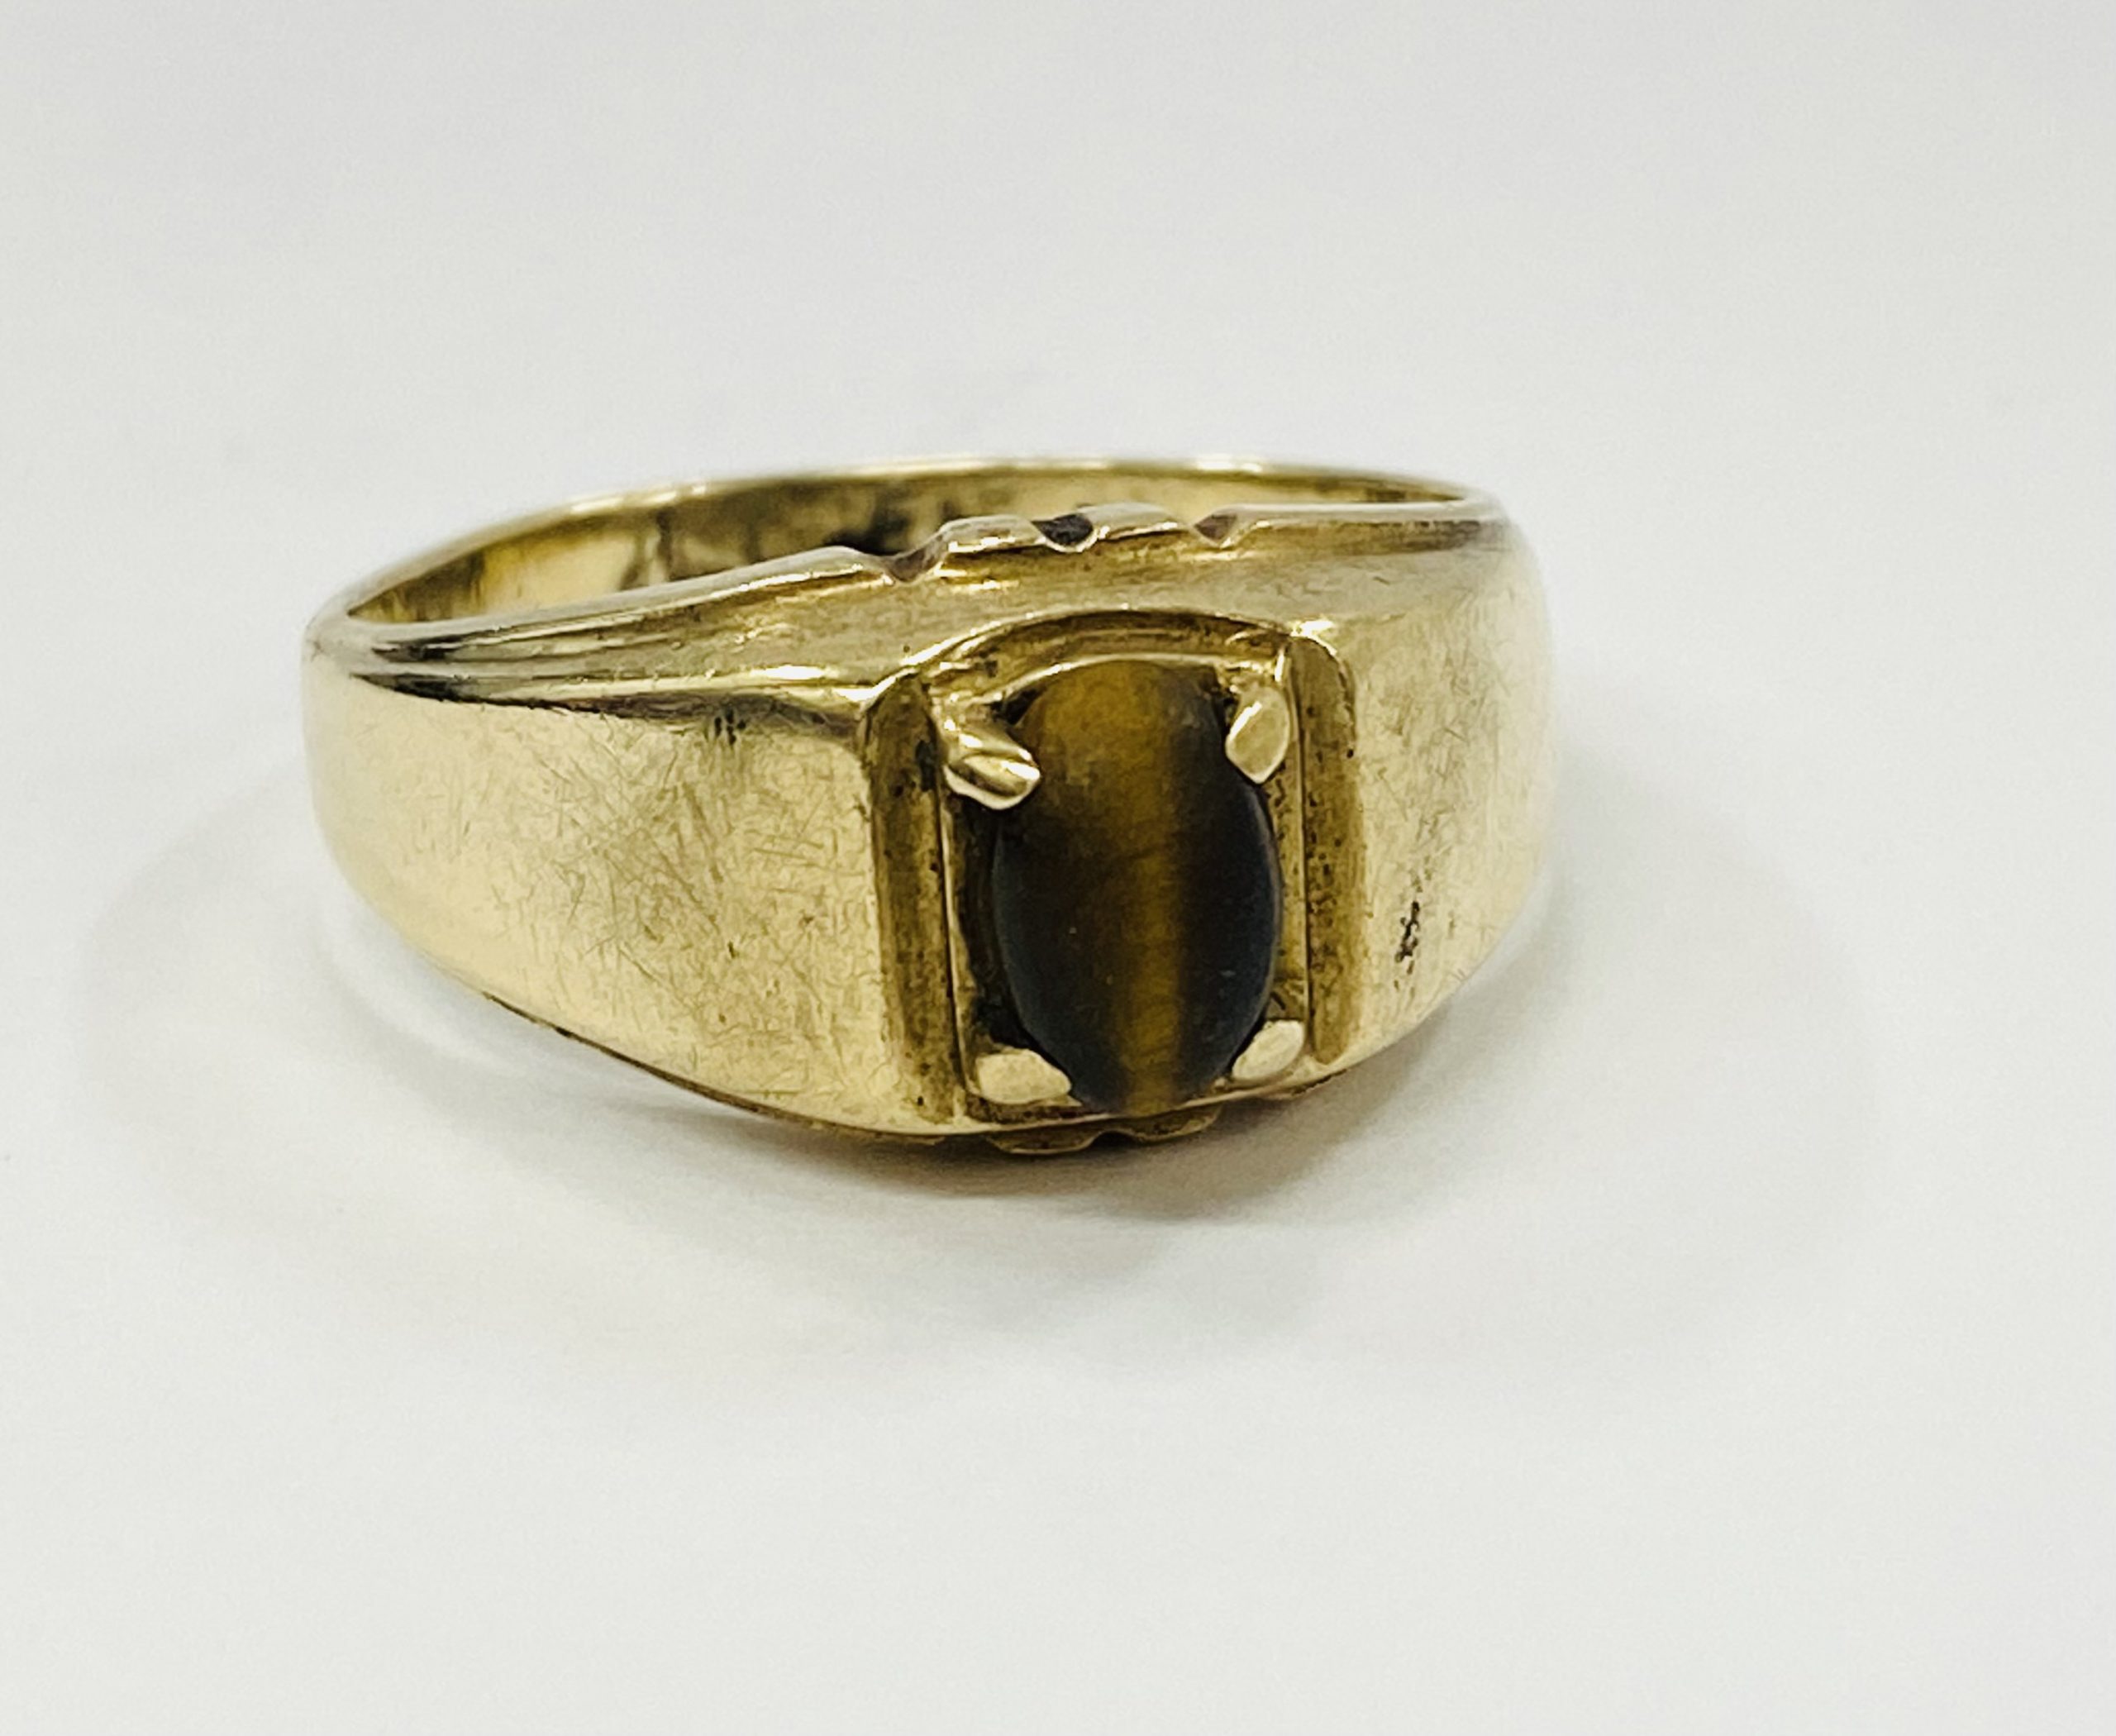 3.837g 10K Yellow Gold Ring w/Tigers Eye Stone (Size 9) Most Wanted Pawn